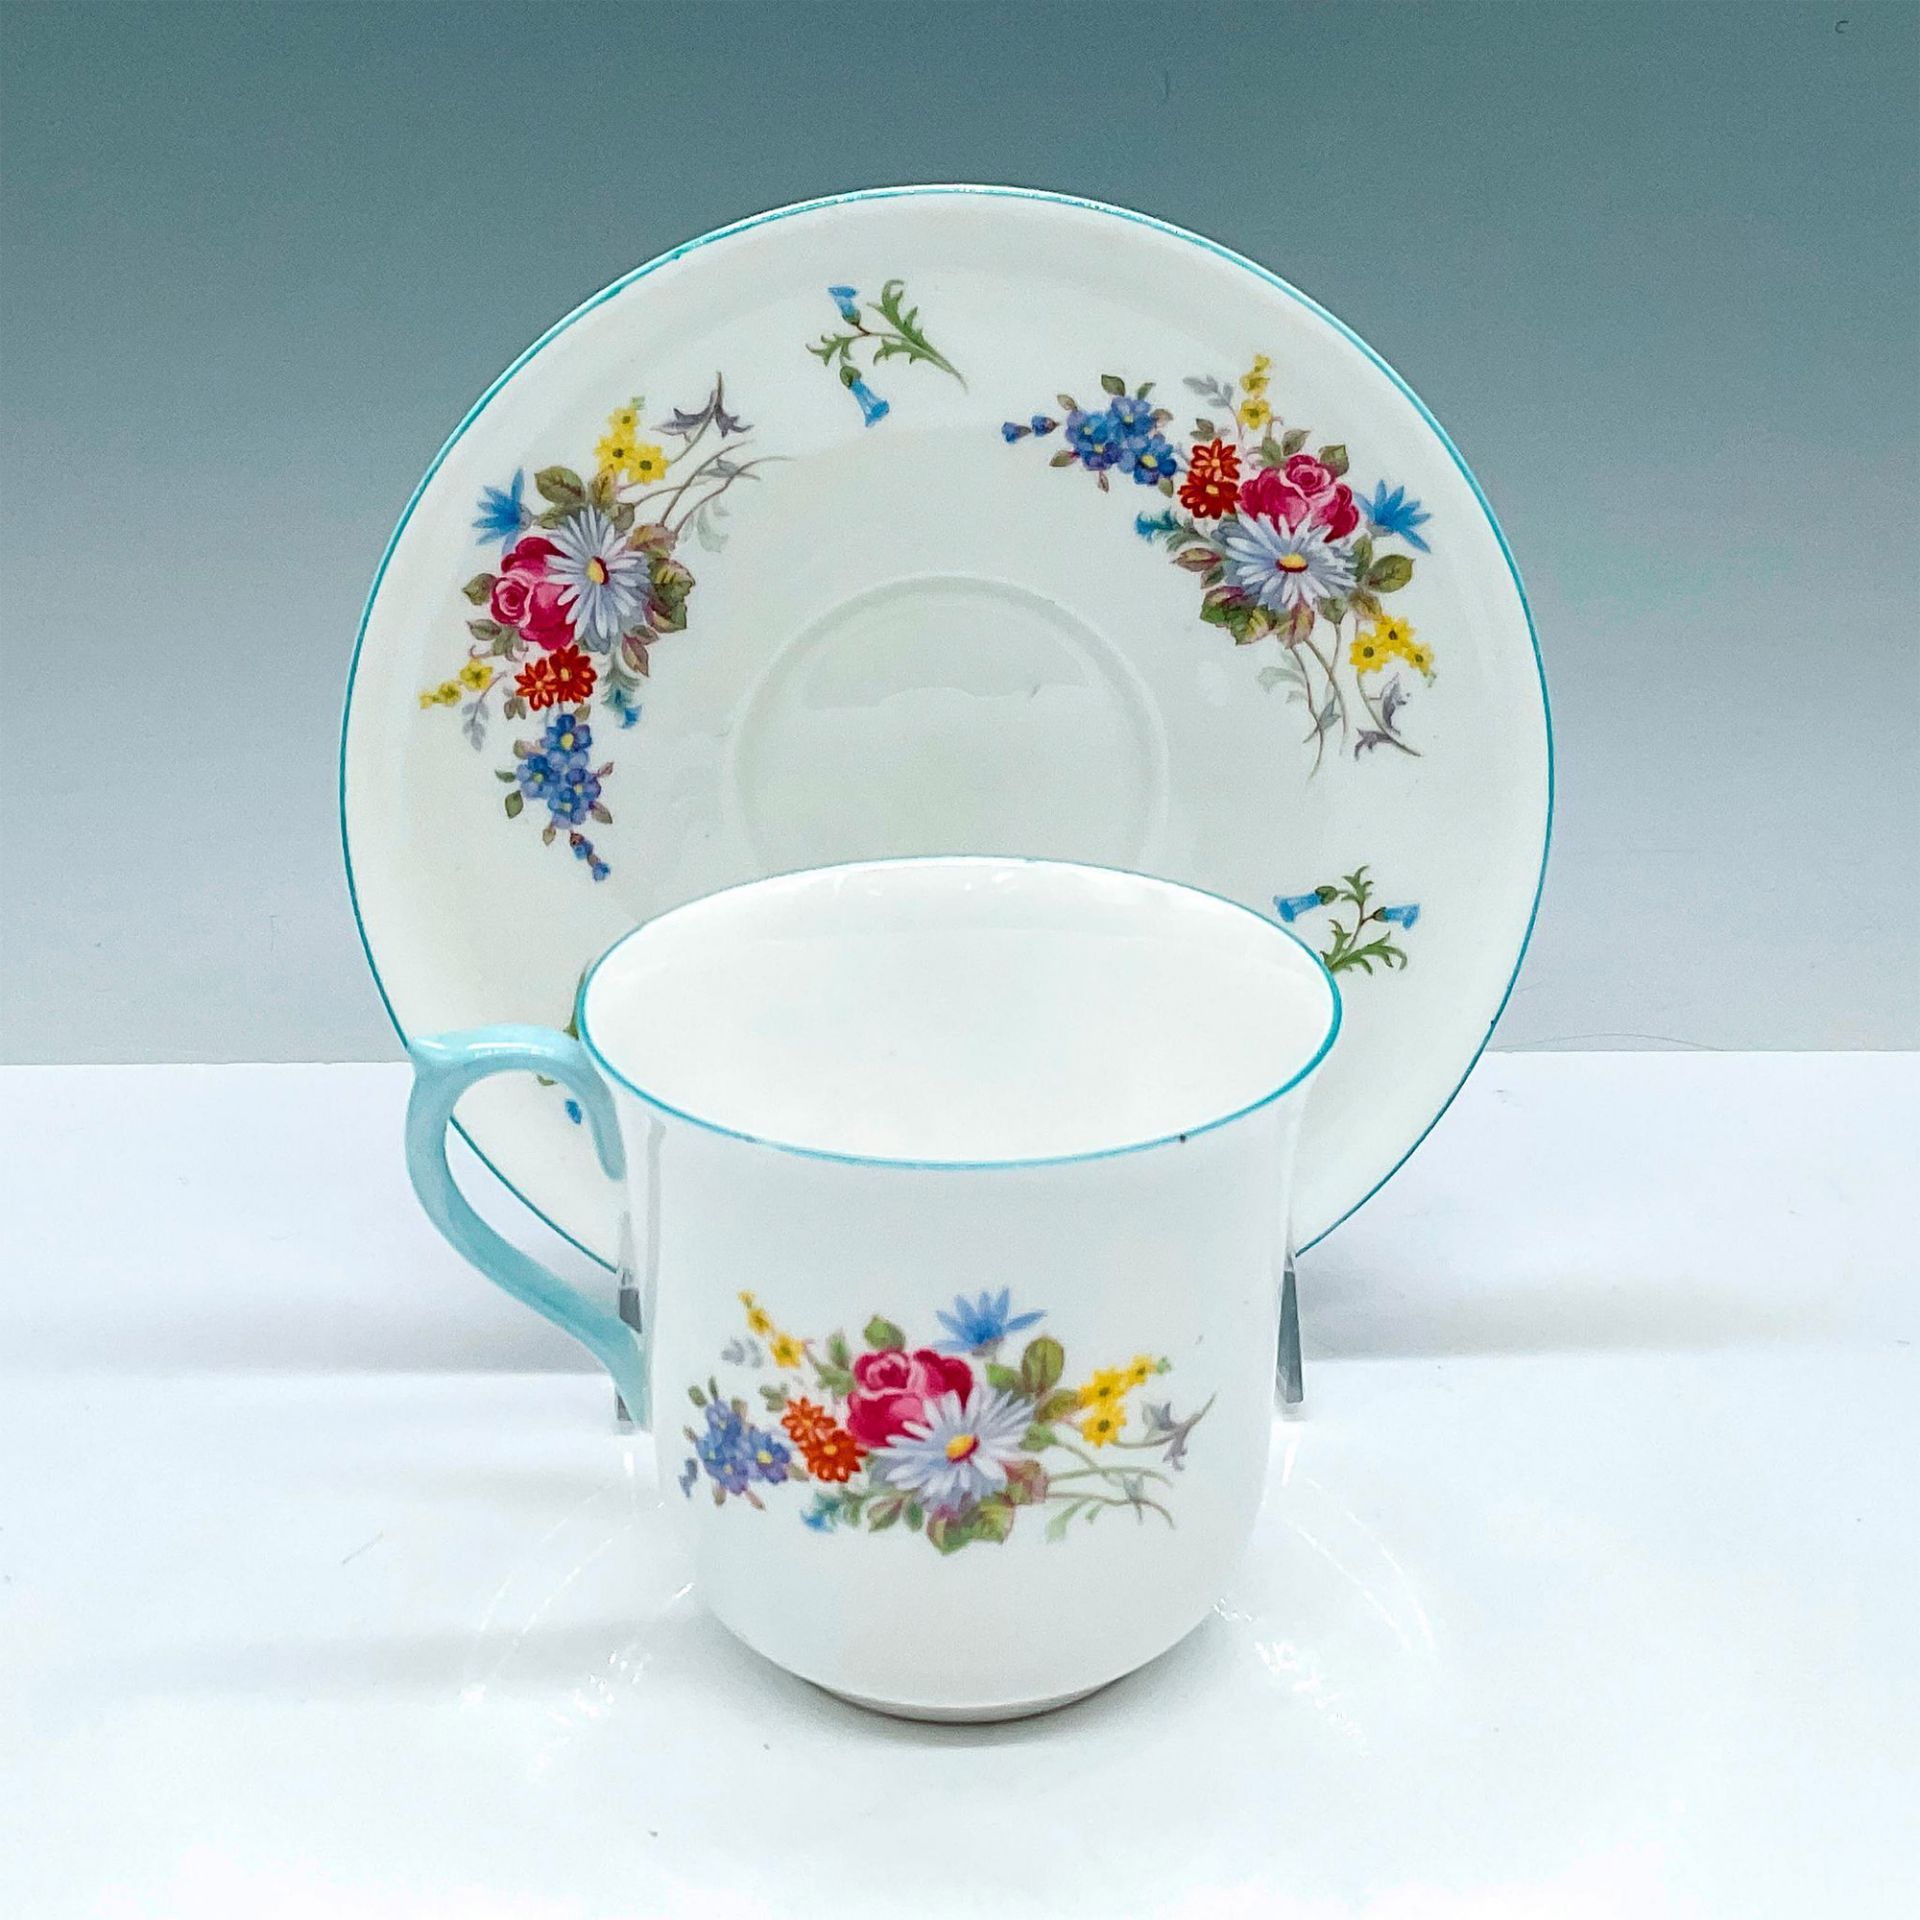 Shelley China Teacup and Saucer Set, Floral Bouquet - Image 2 of 3